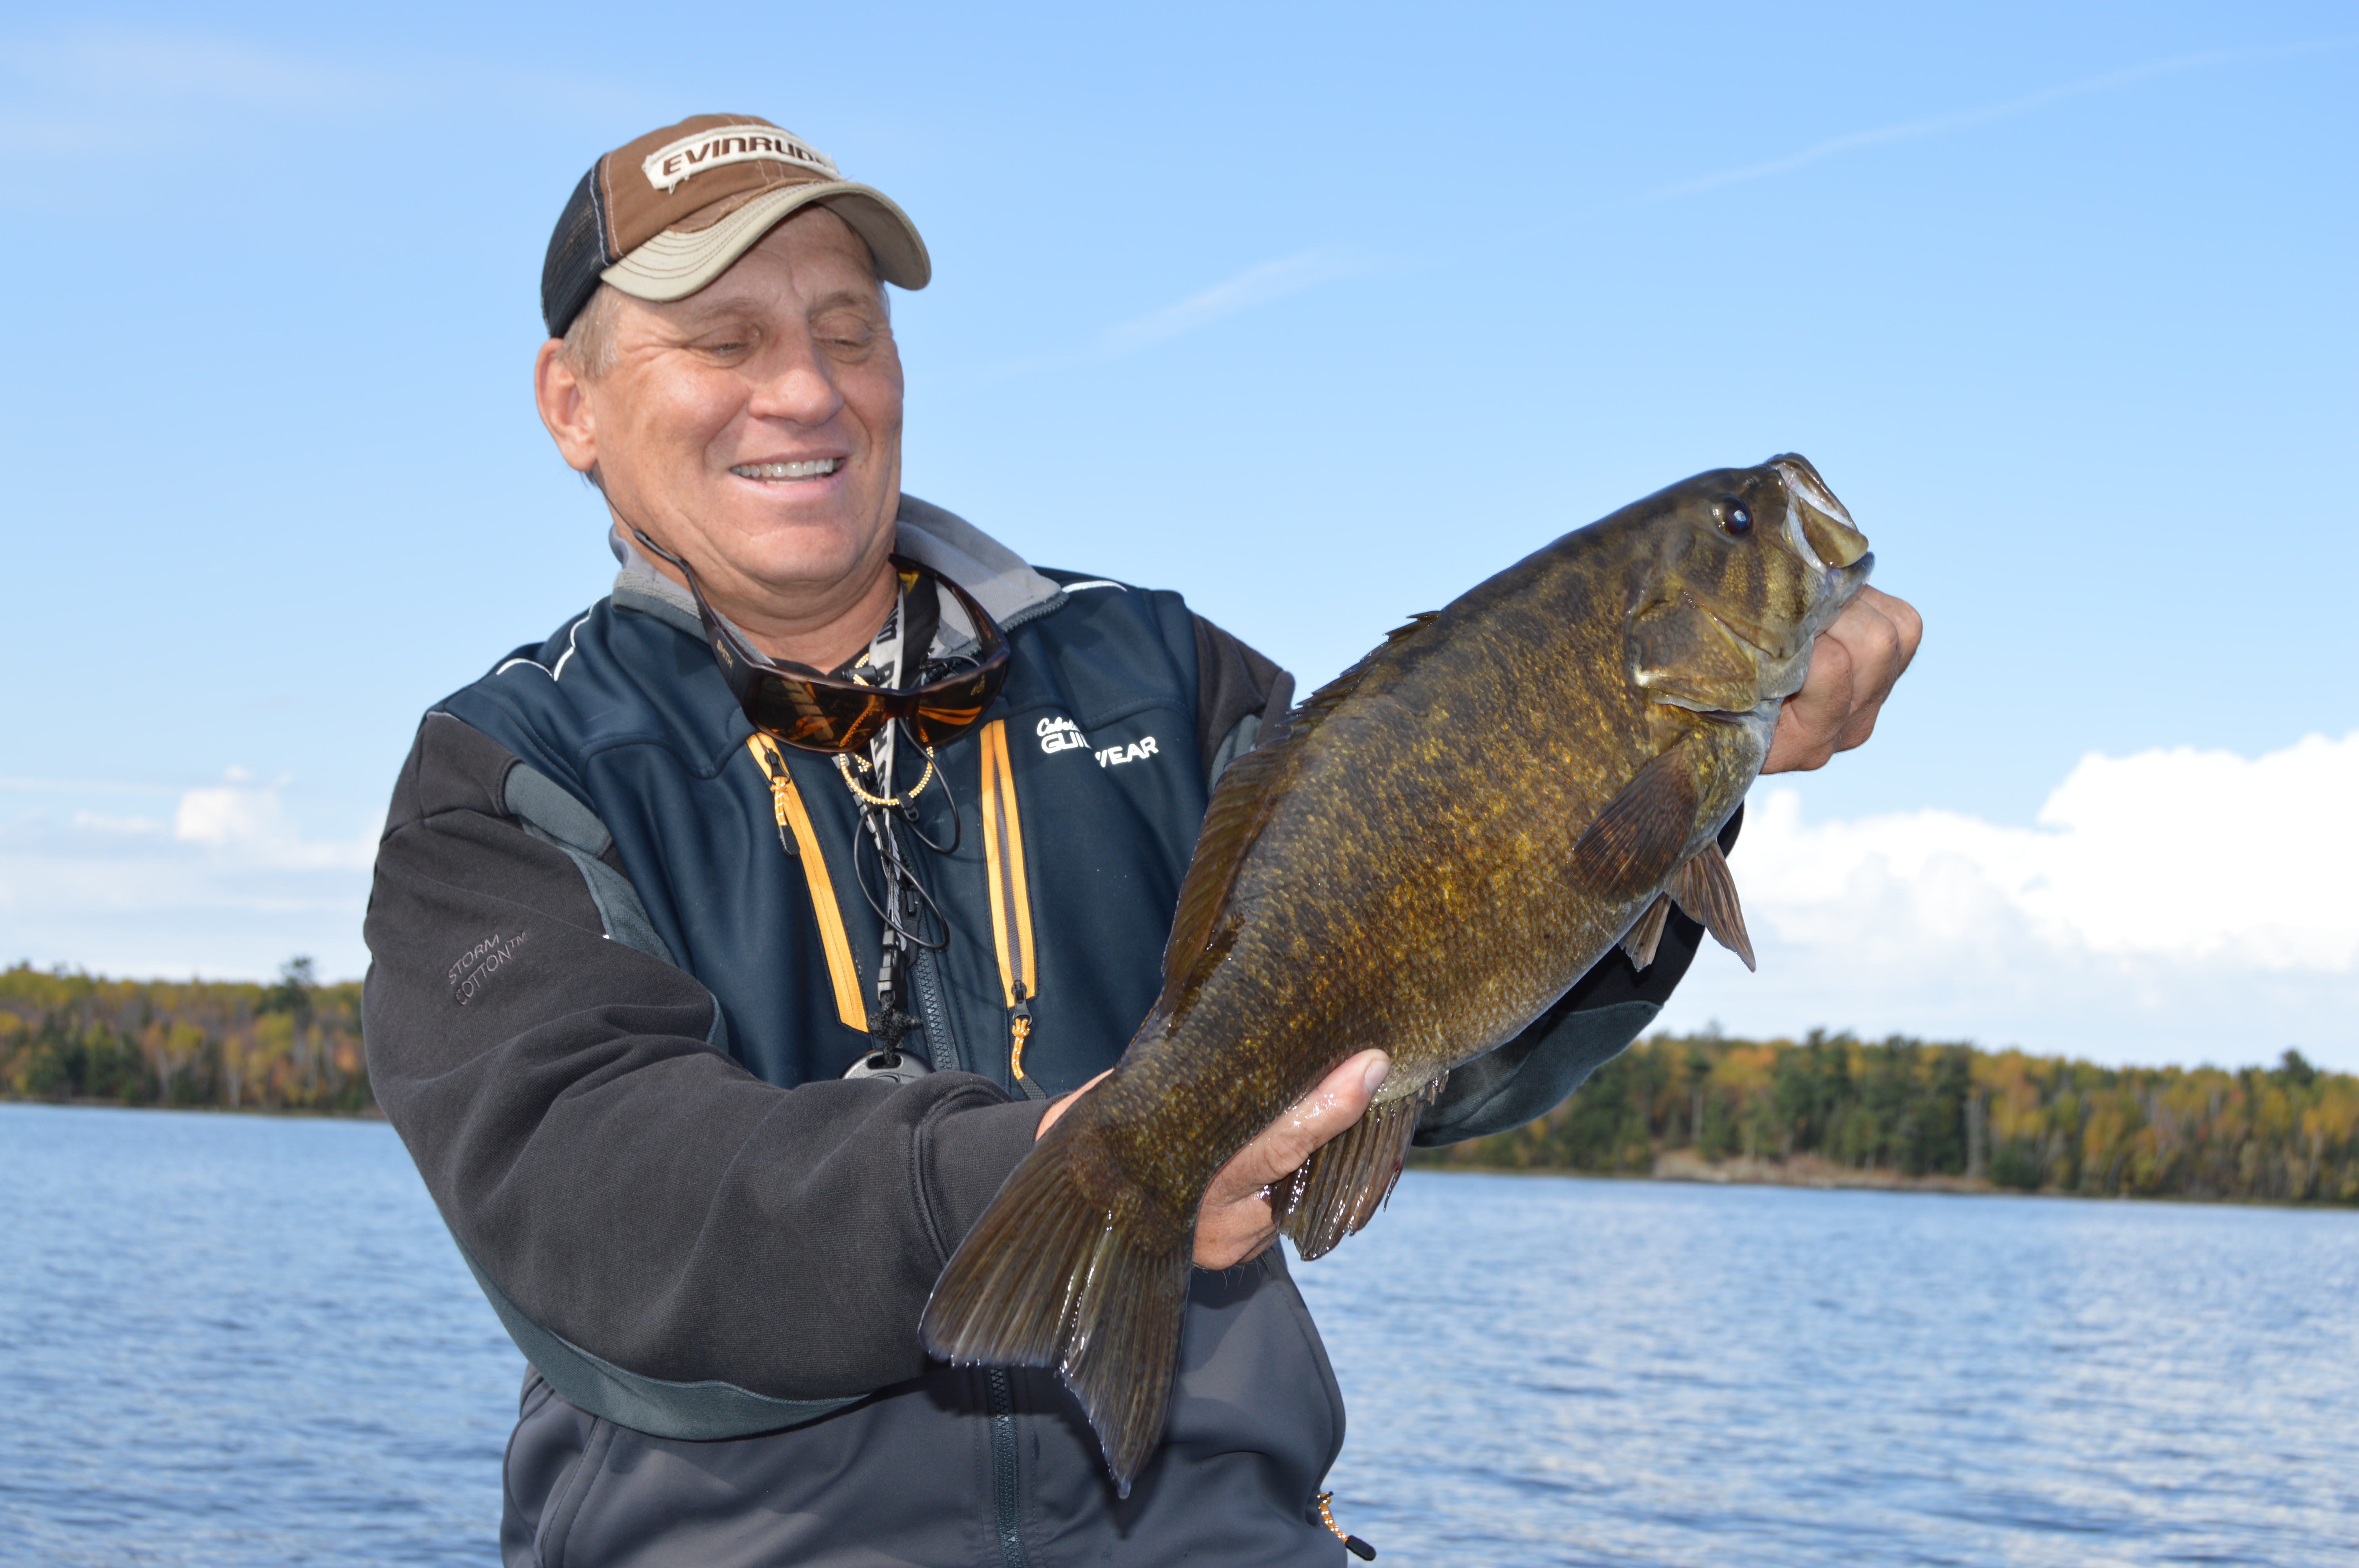 Mike Frisch with a smallmouth bass caught on a Northland Fishing Tackle Fire-Ball Jig.